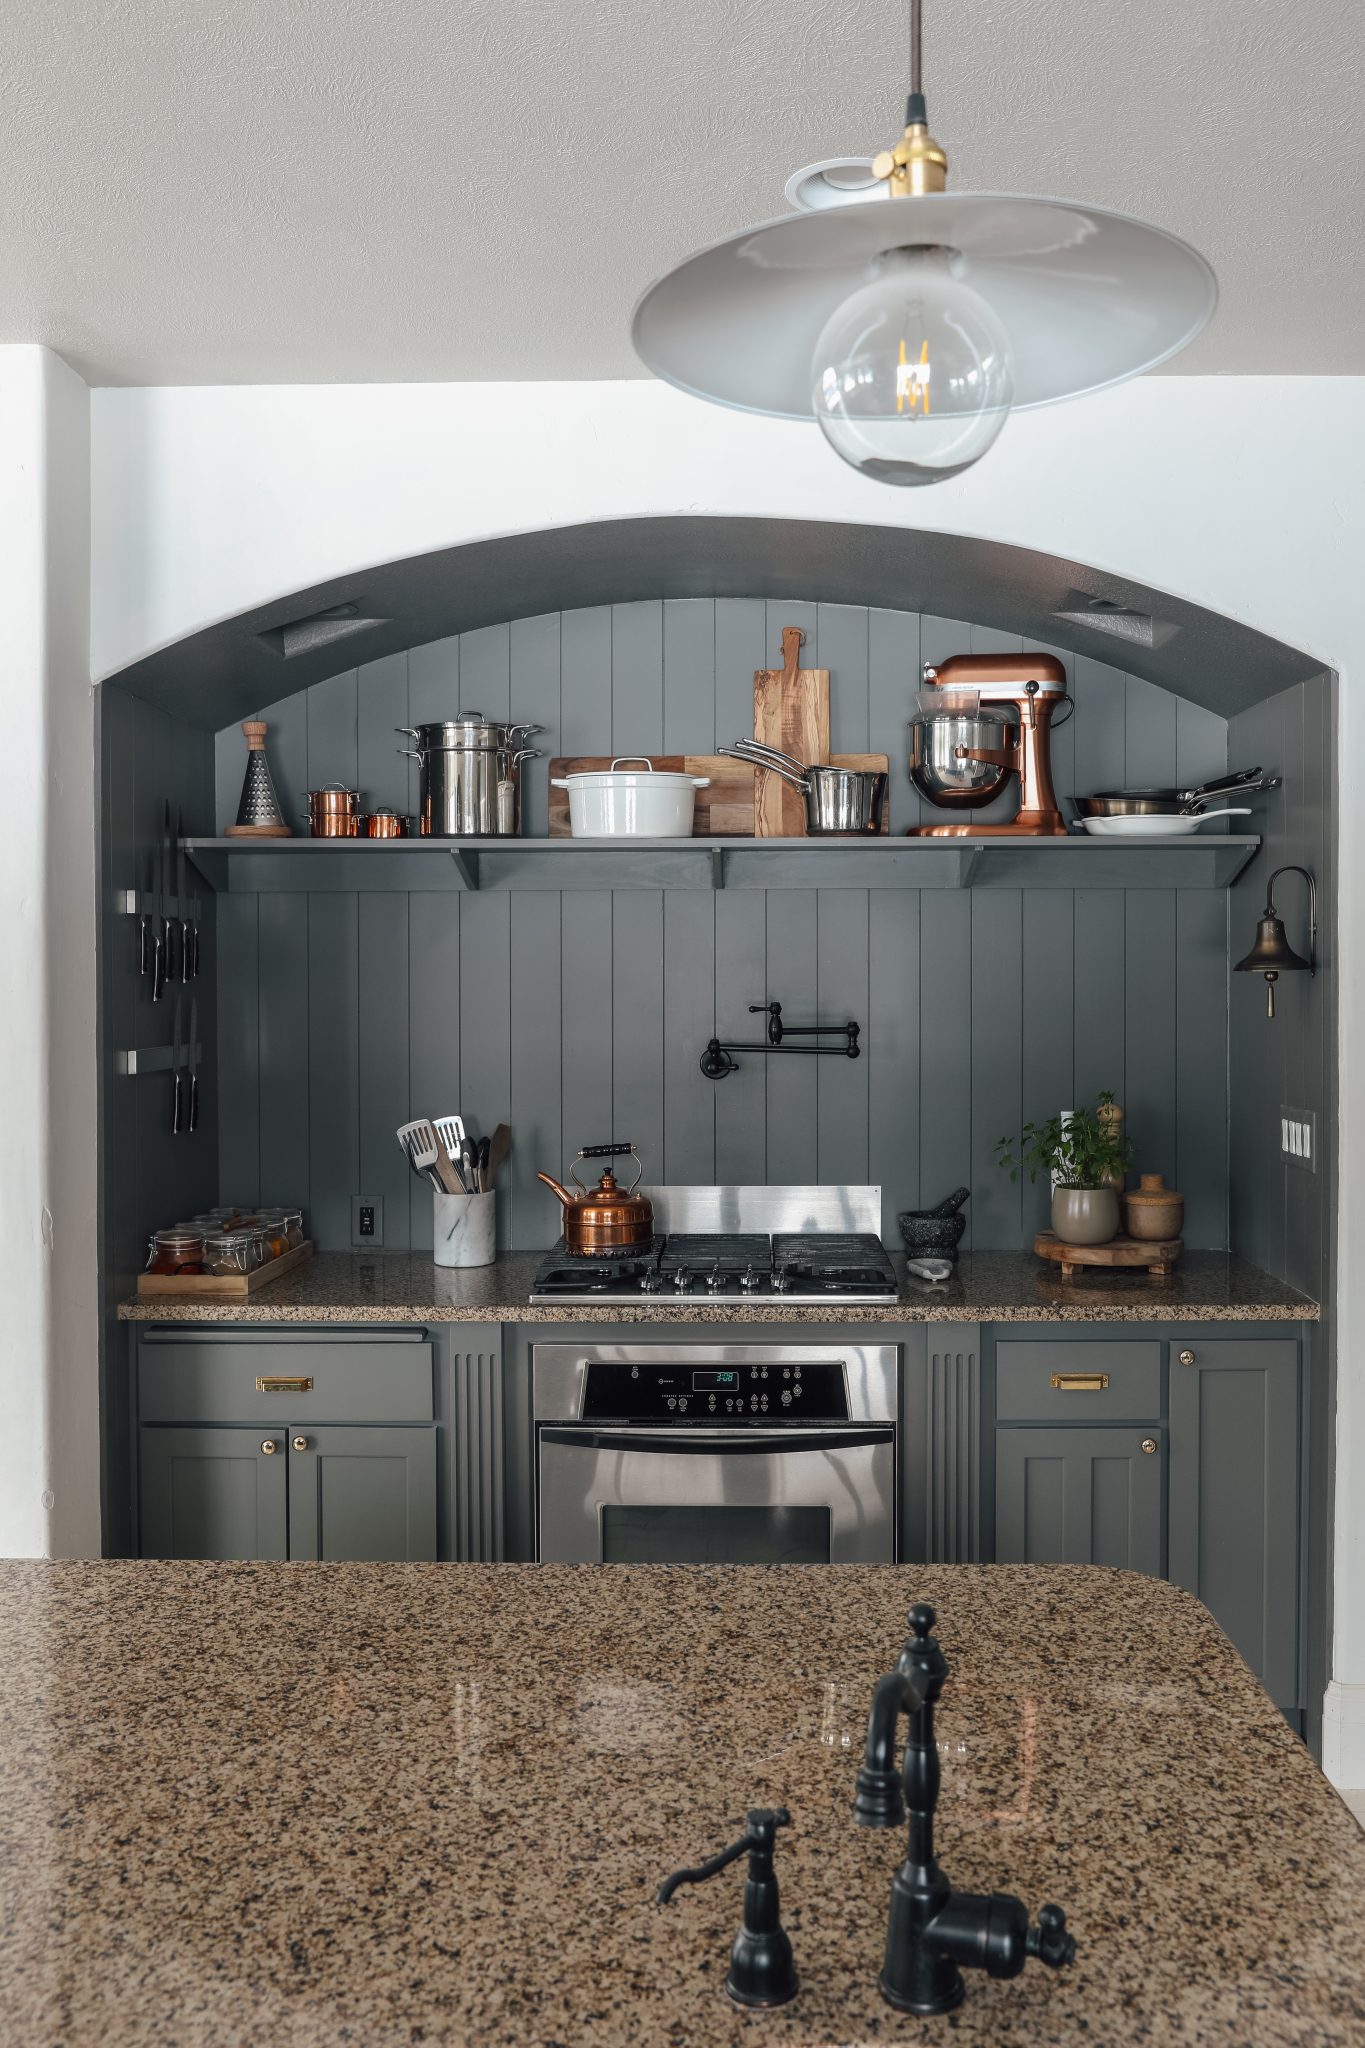 Rod's Kitchens on X: Lively Kitchen Accessories for Kitchen Renovation  Ideas #kitchens #renovations    / X